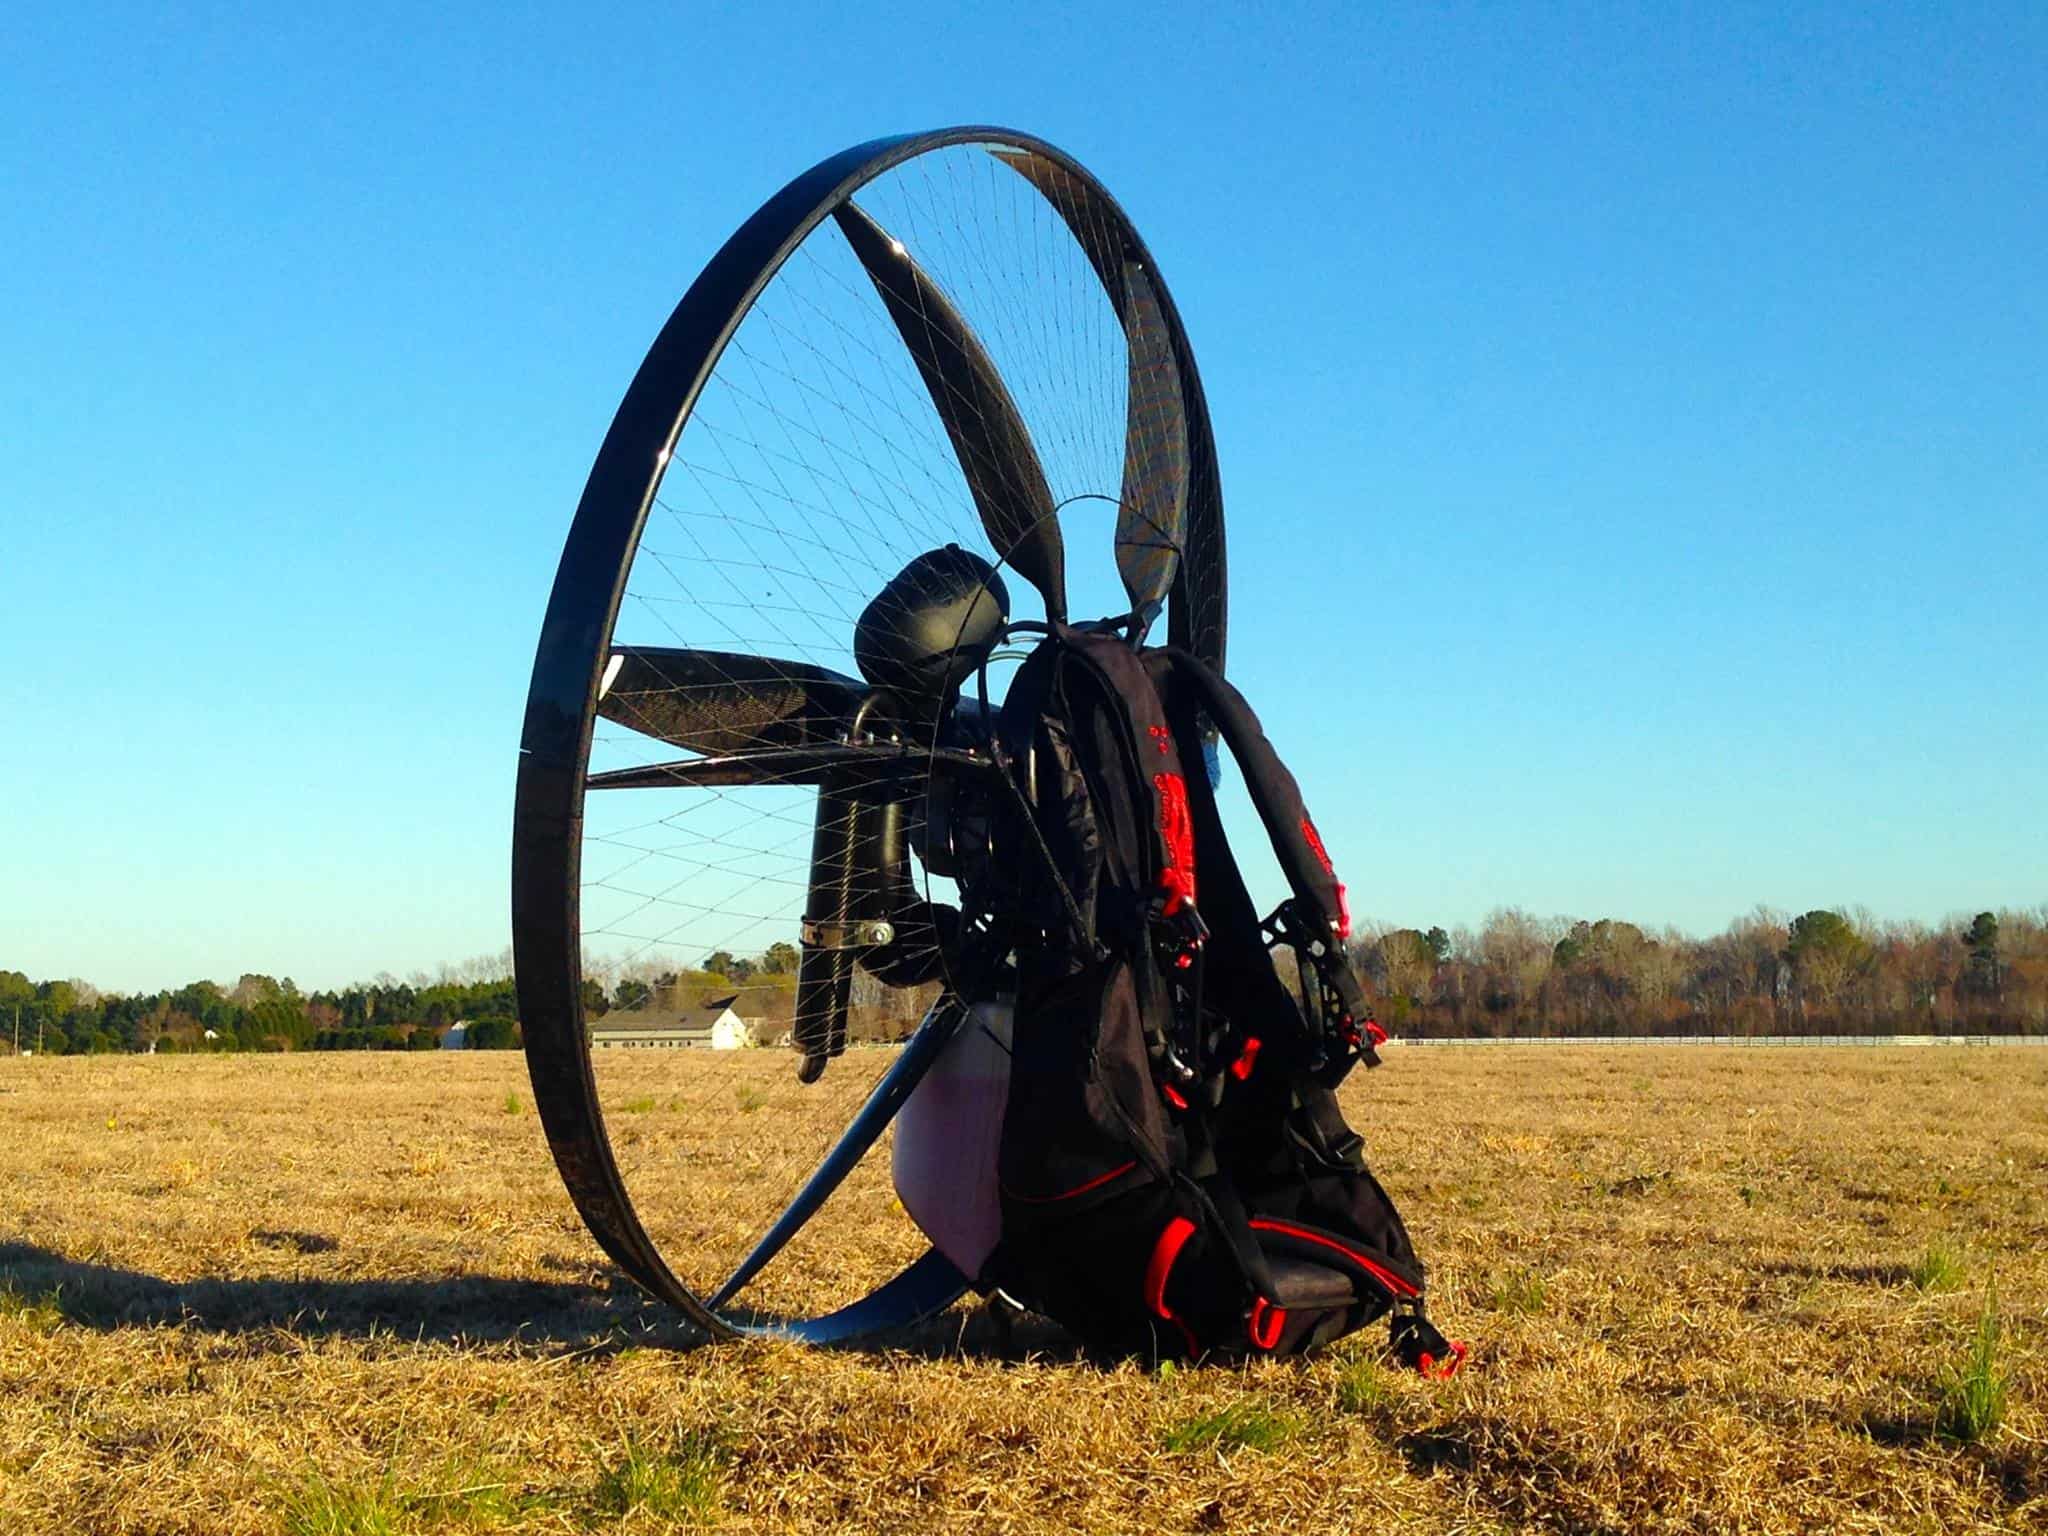 Carbon Fiber Paramotor In the Open Field